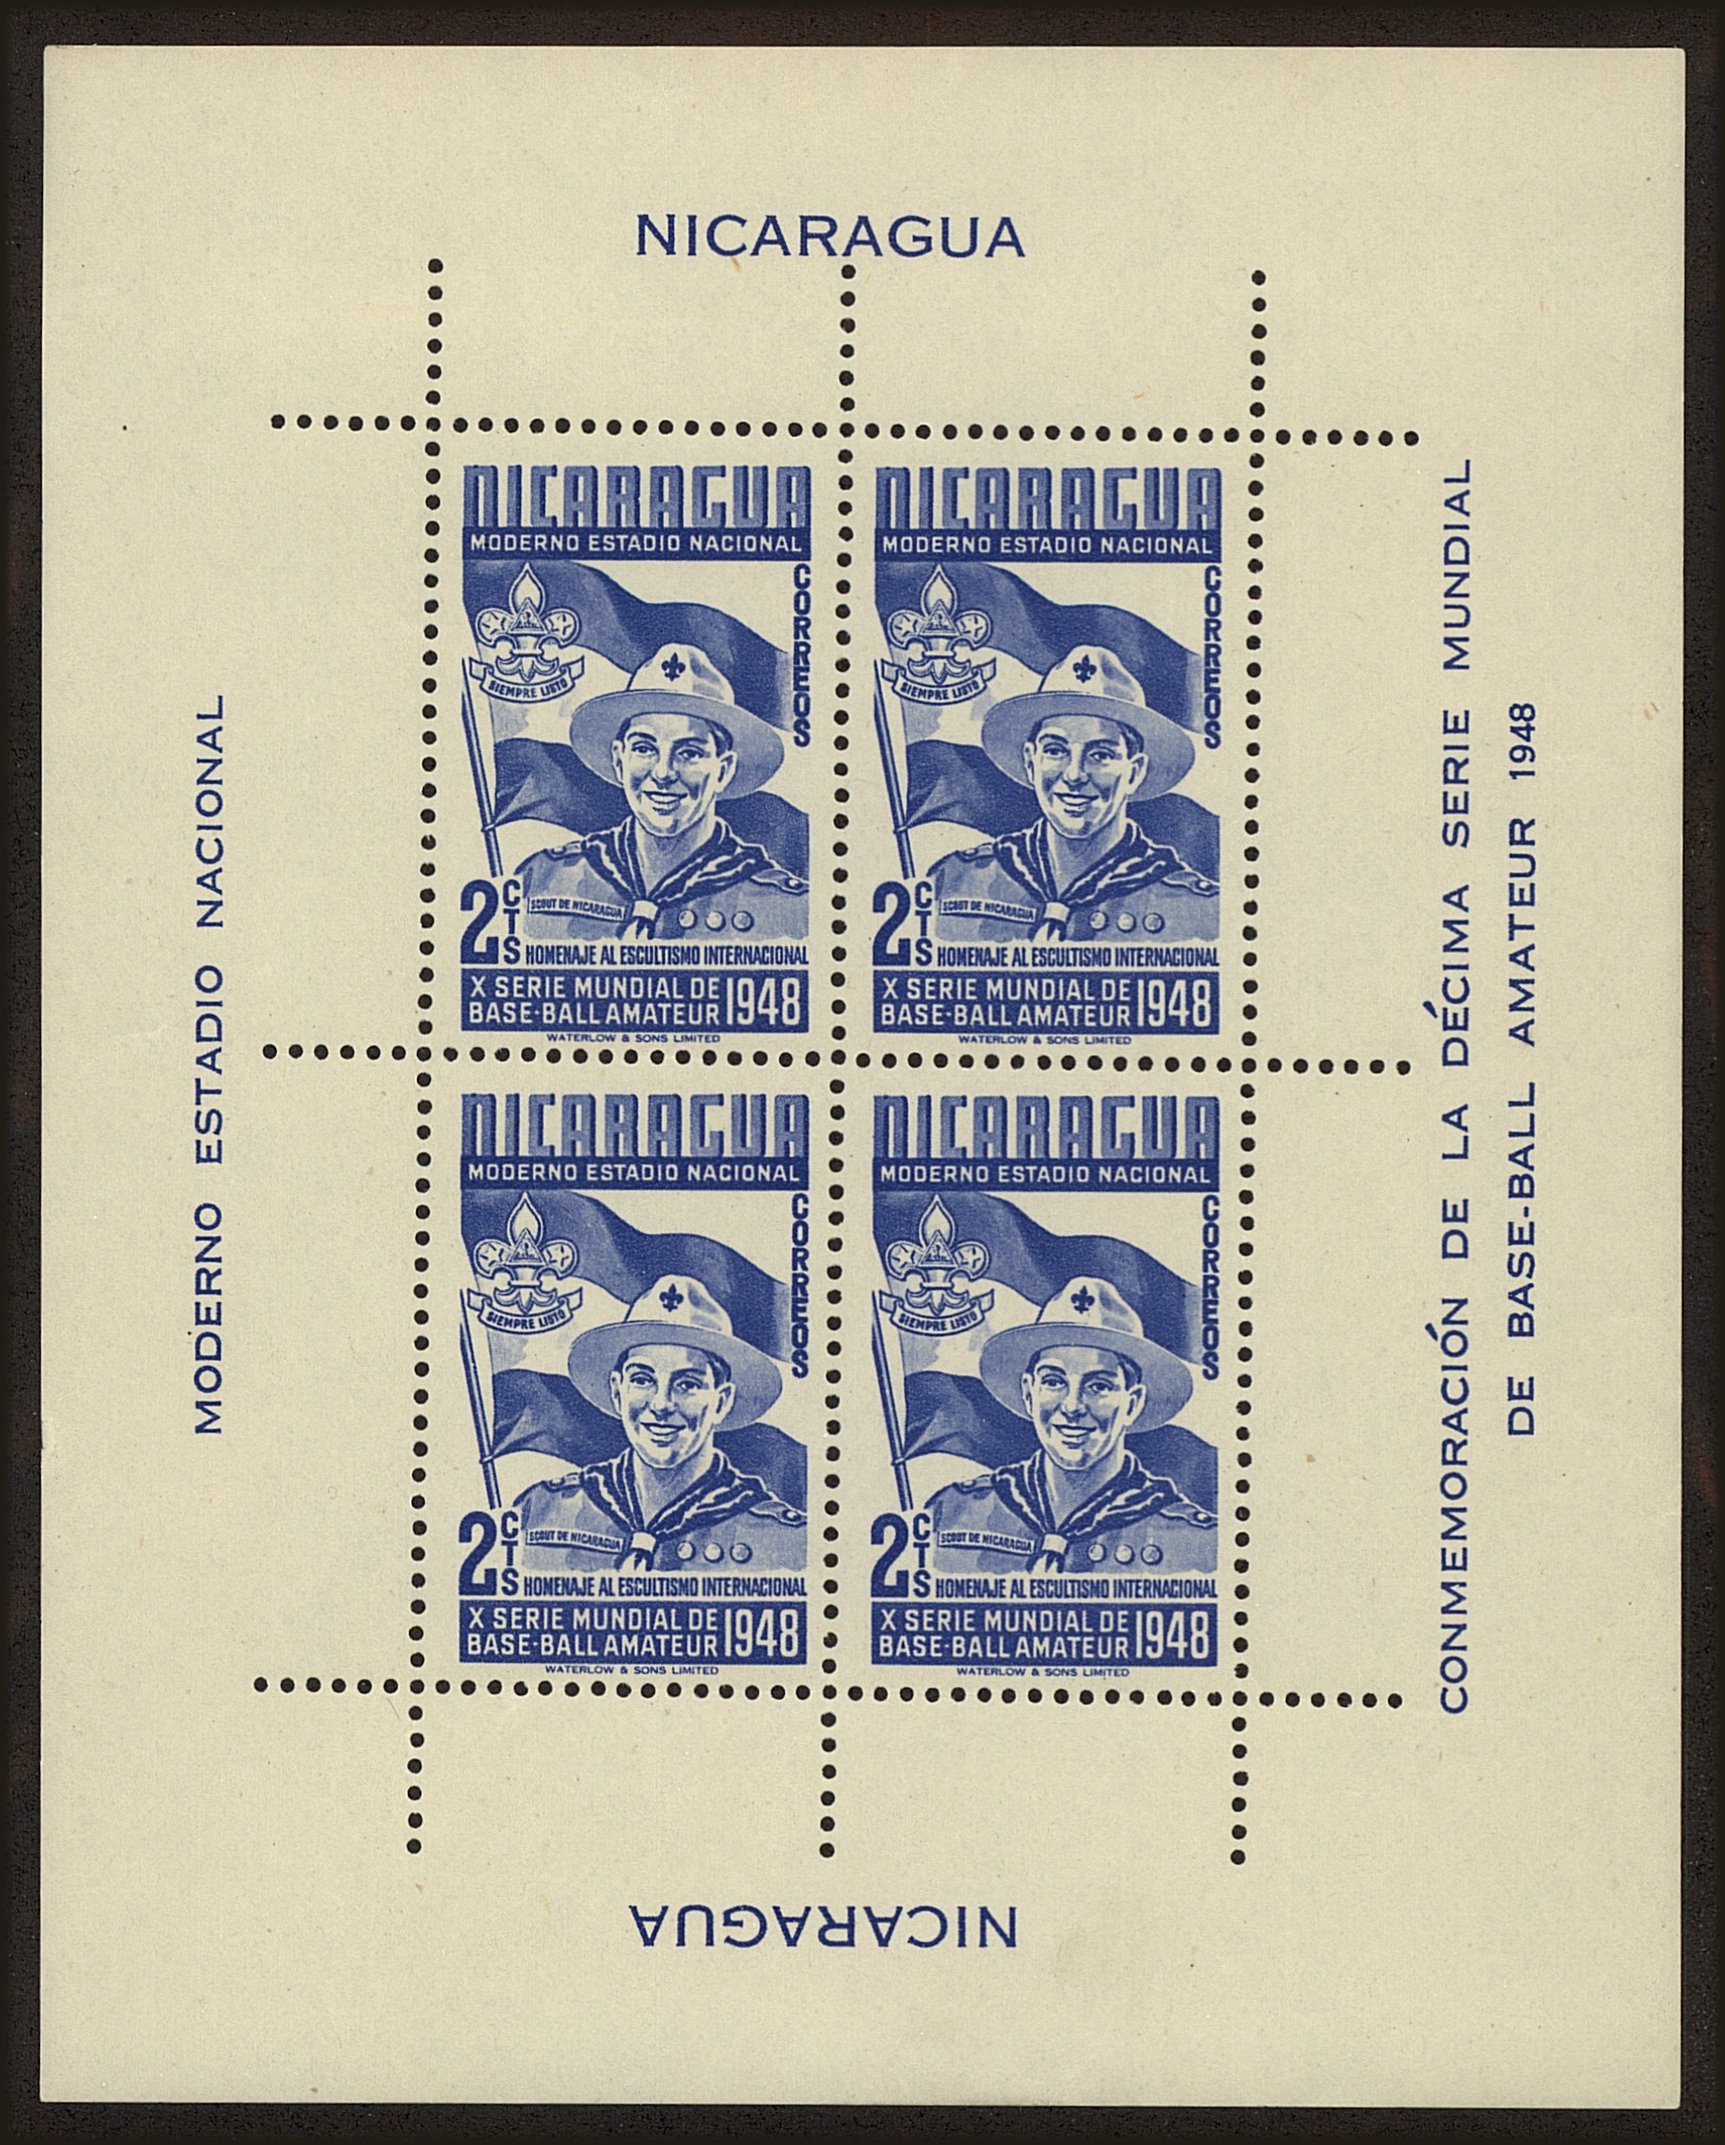 Front view of Nicaragua 718 collectors stamp